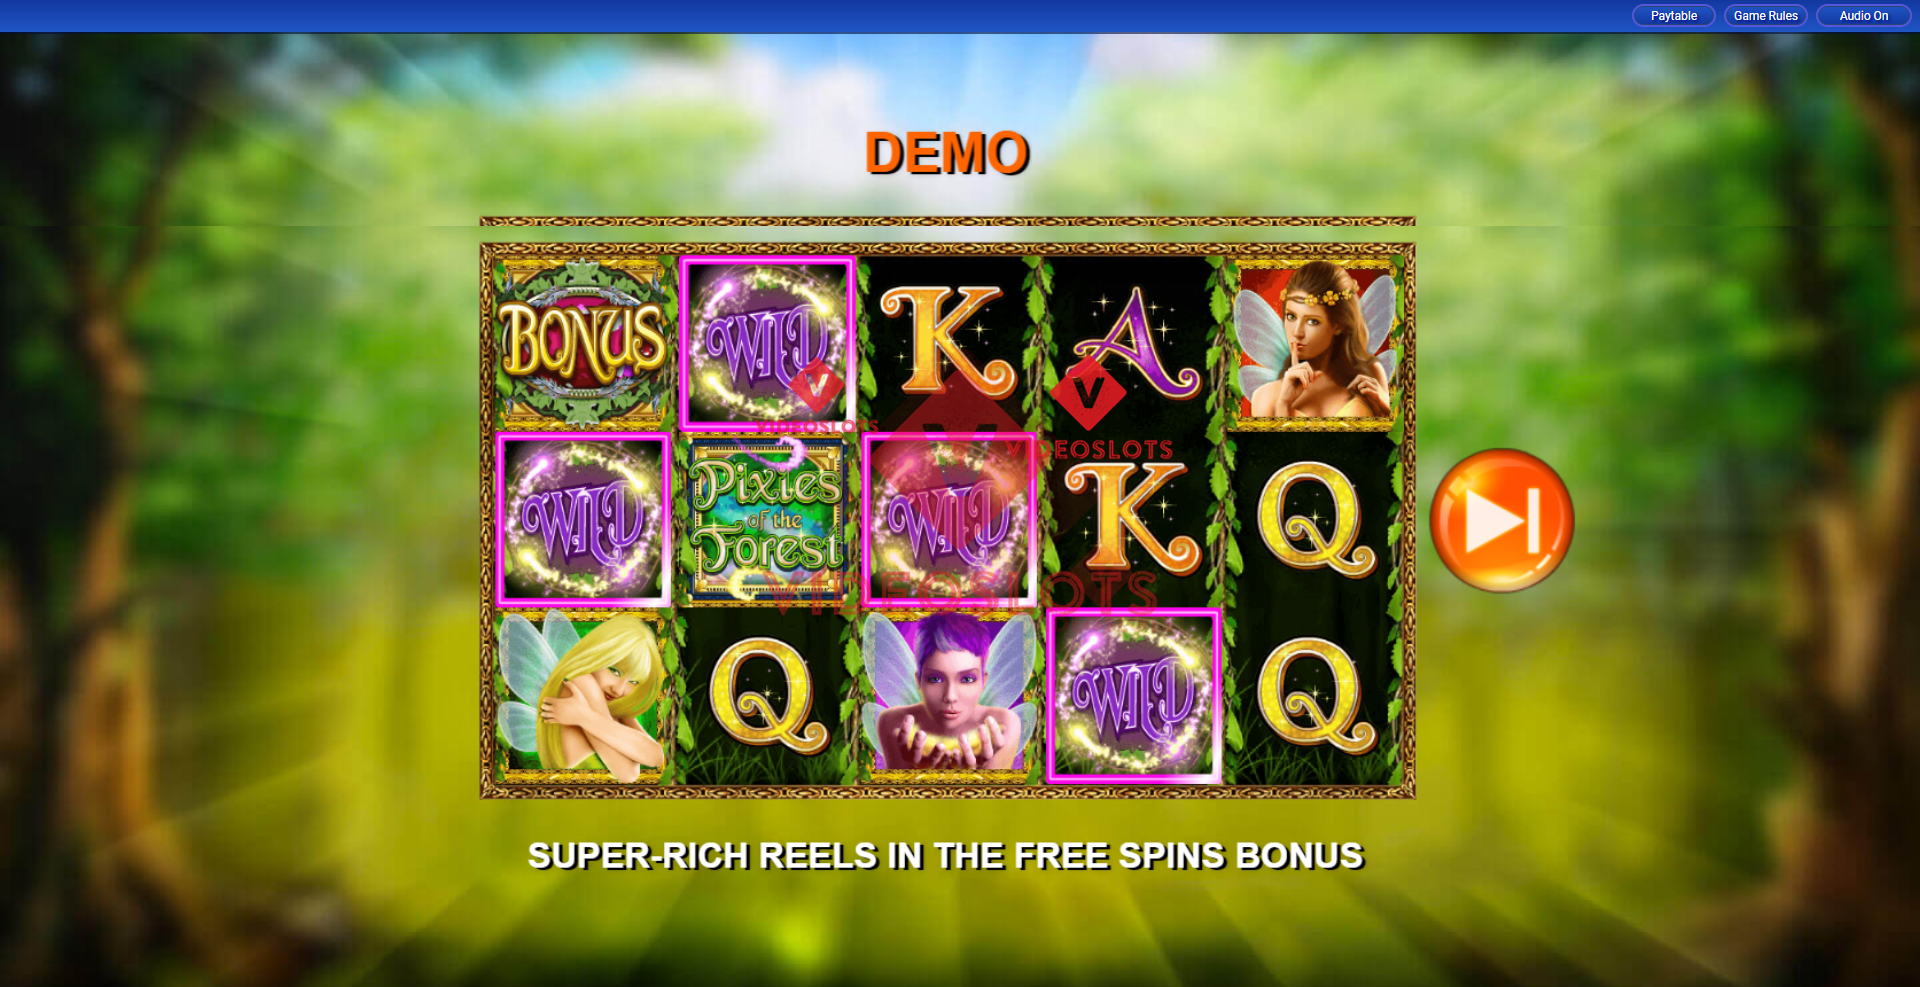 Game Intro for Pixies of the Forest slot from IGT